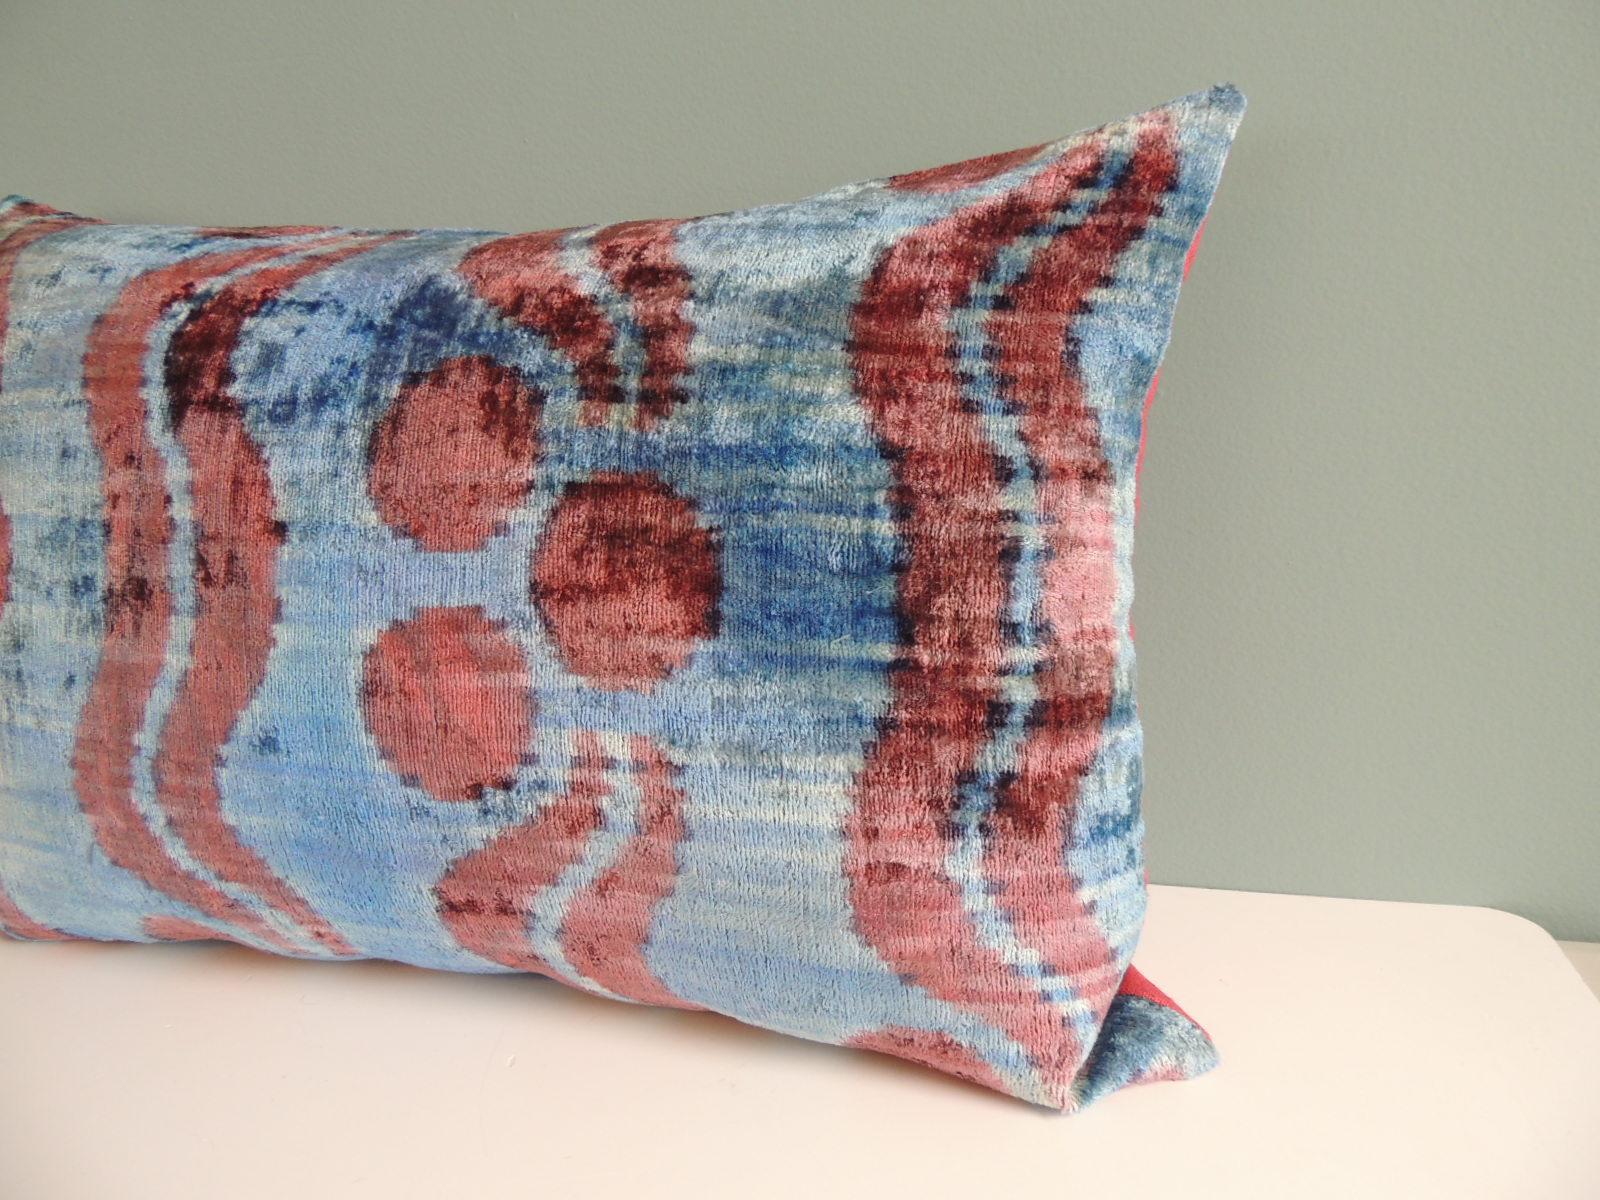 Ikat blue and pink decorative bolster pillow with hot pink linen backing.
Decorative pillow handcrafted and designed in the USA.
Closure by stitch (no zipper closure) with custom-made feather/Down pillow insert.
Size: 16